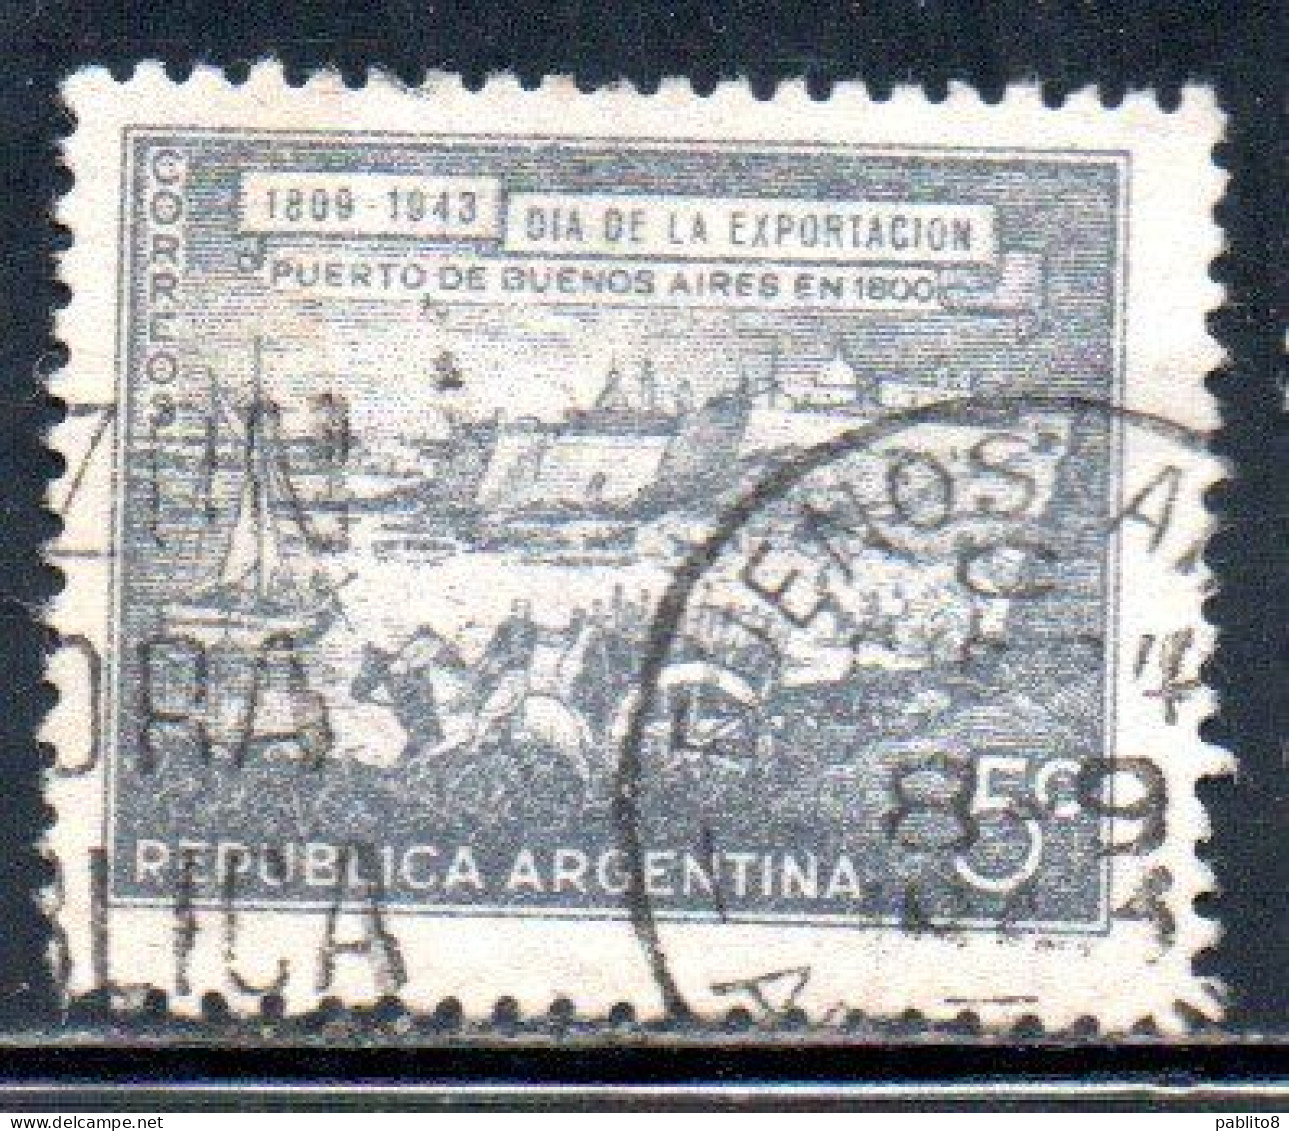 ARGENTINA 1943 DAY OF EXPORTS PORT OF BUENOS AIRES IN 1800  5c USED USADO OBLITERE' - Usados